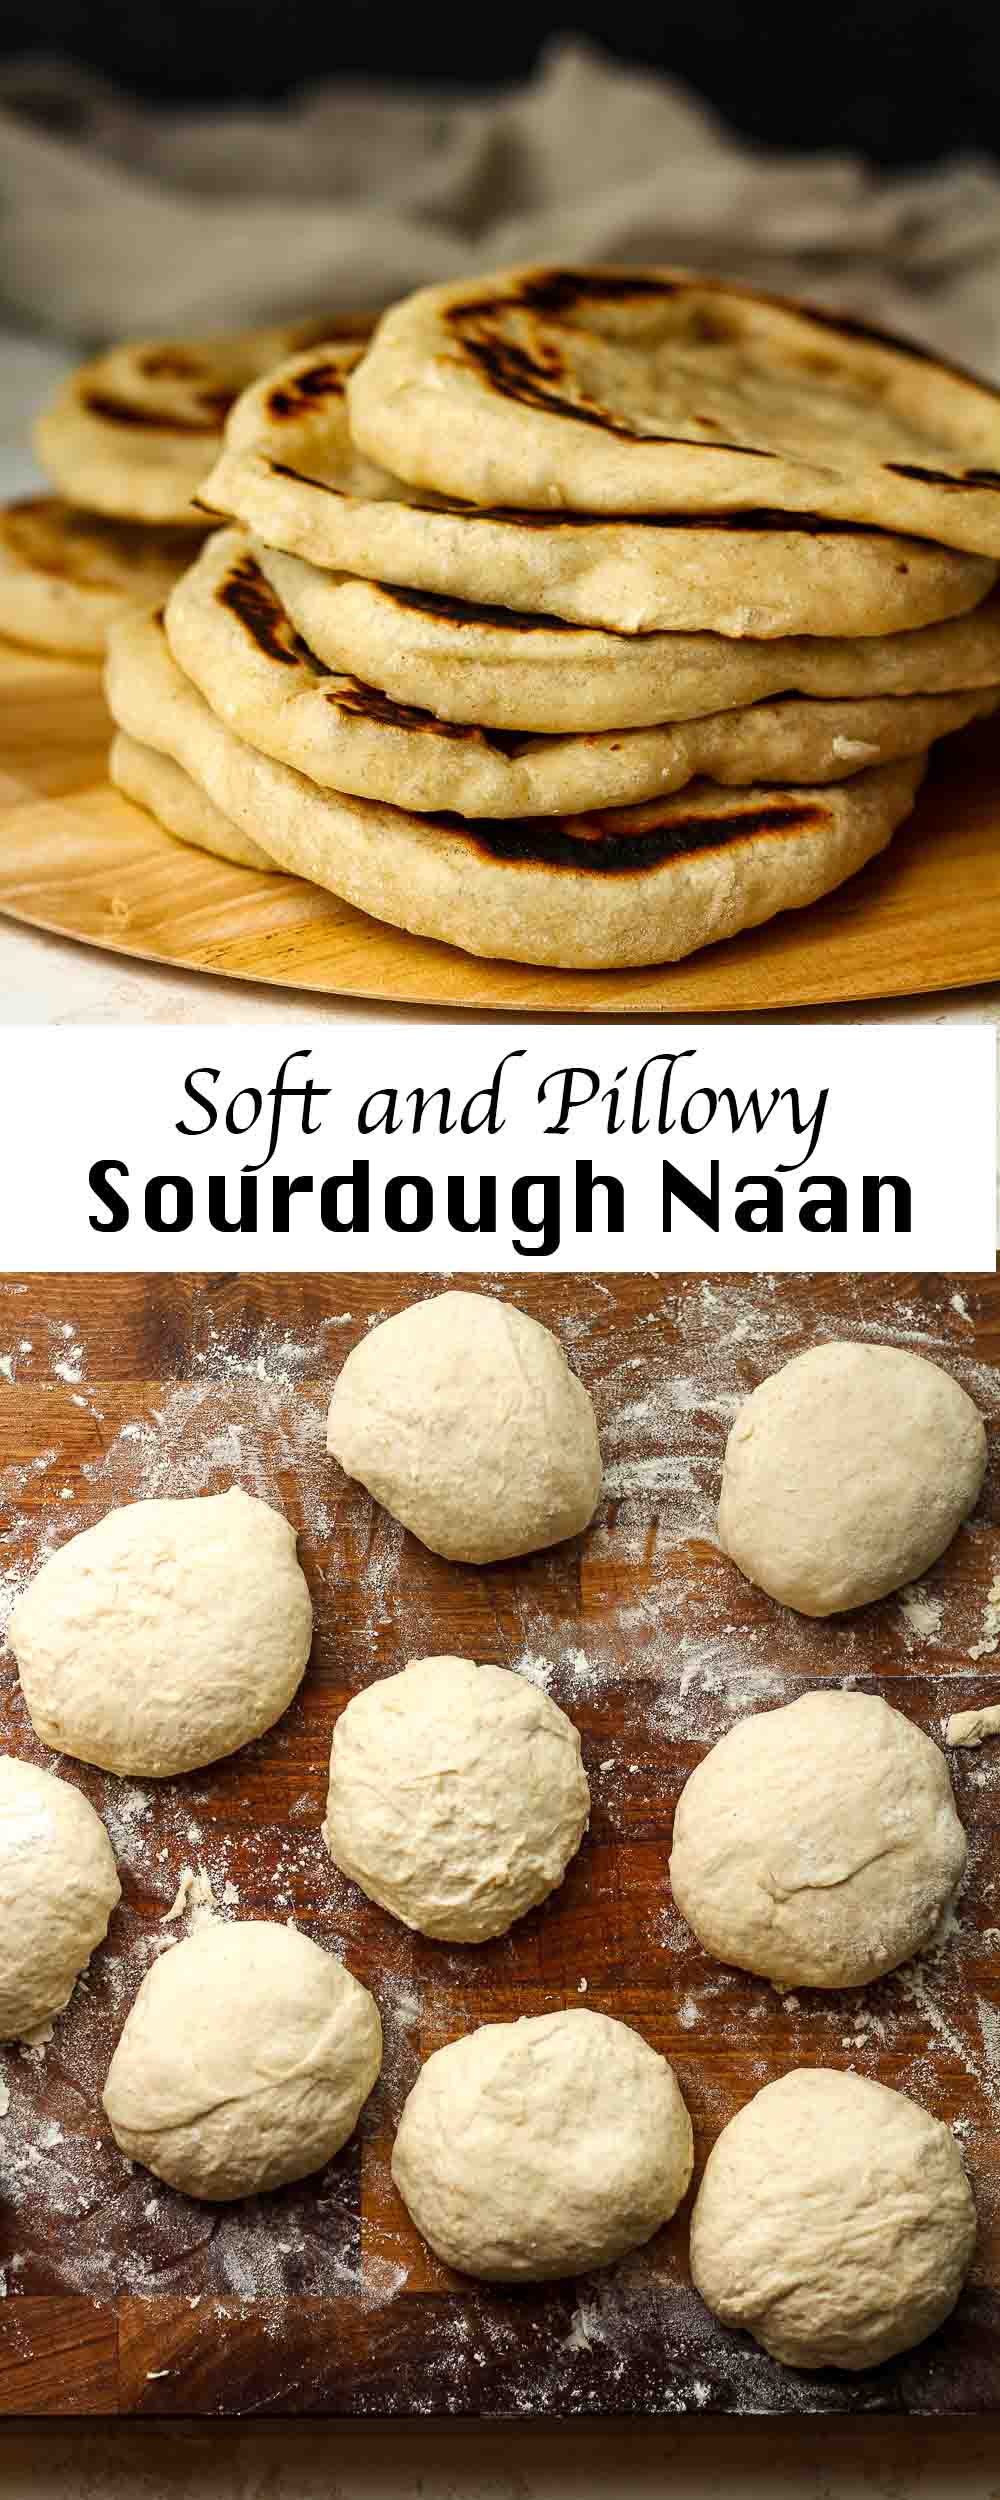 A collage of soft and pillowy sourdough naan.